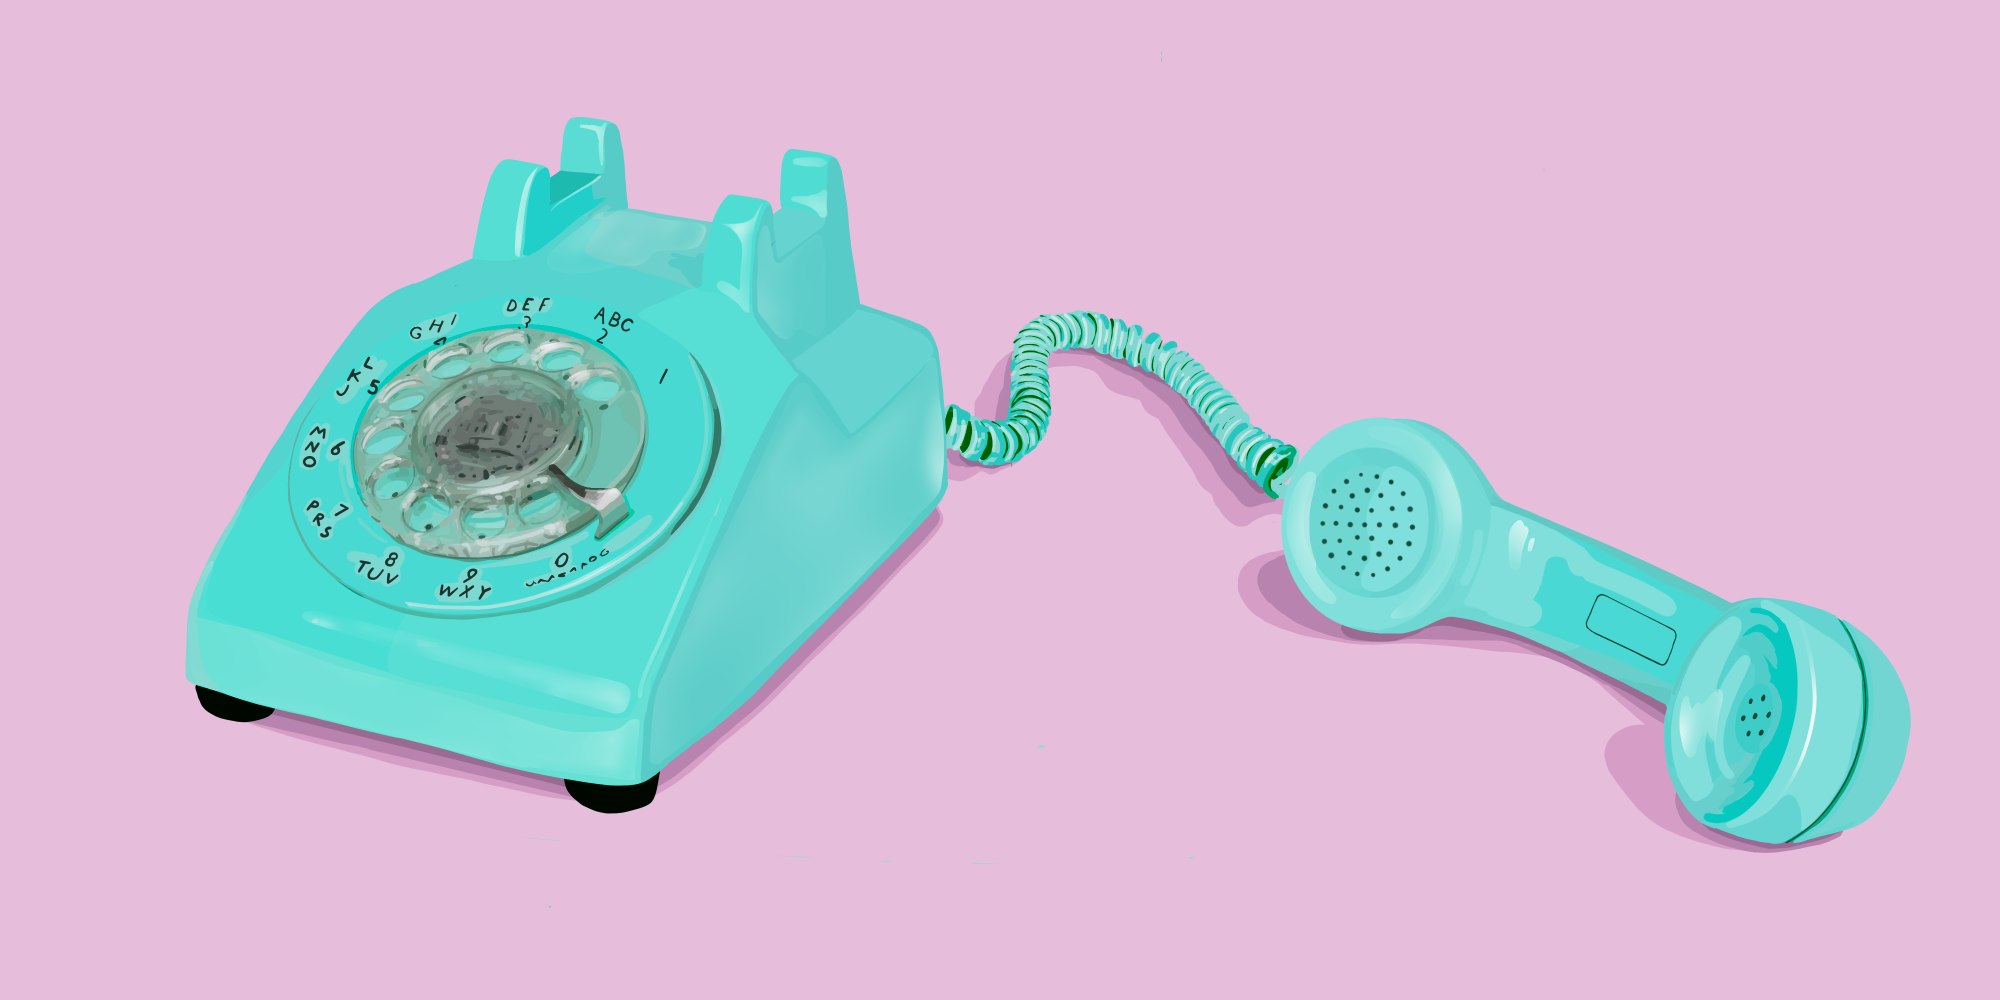 Free Art - Rotary telephone with receiver off the hook | Mixkit